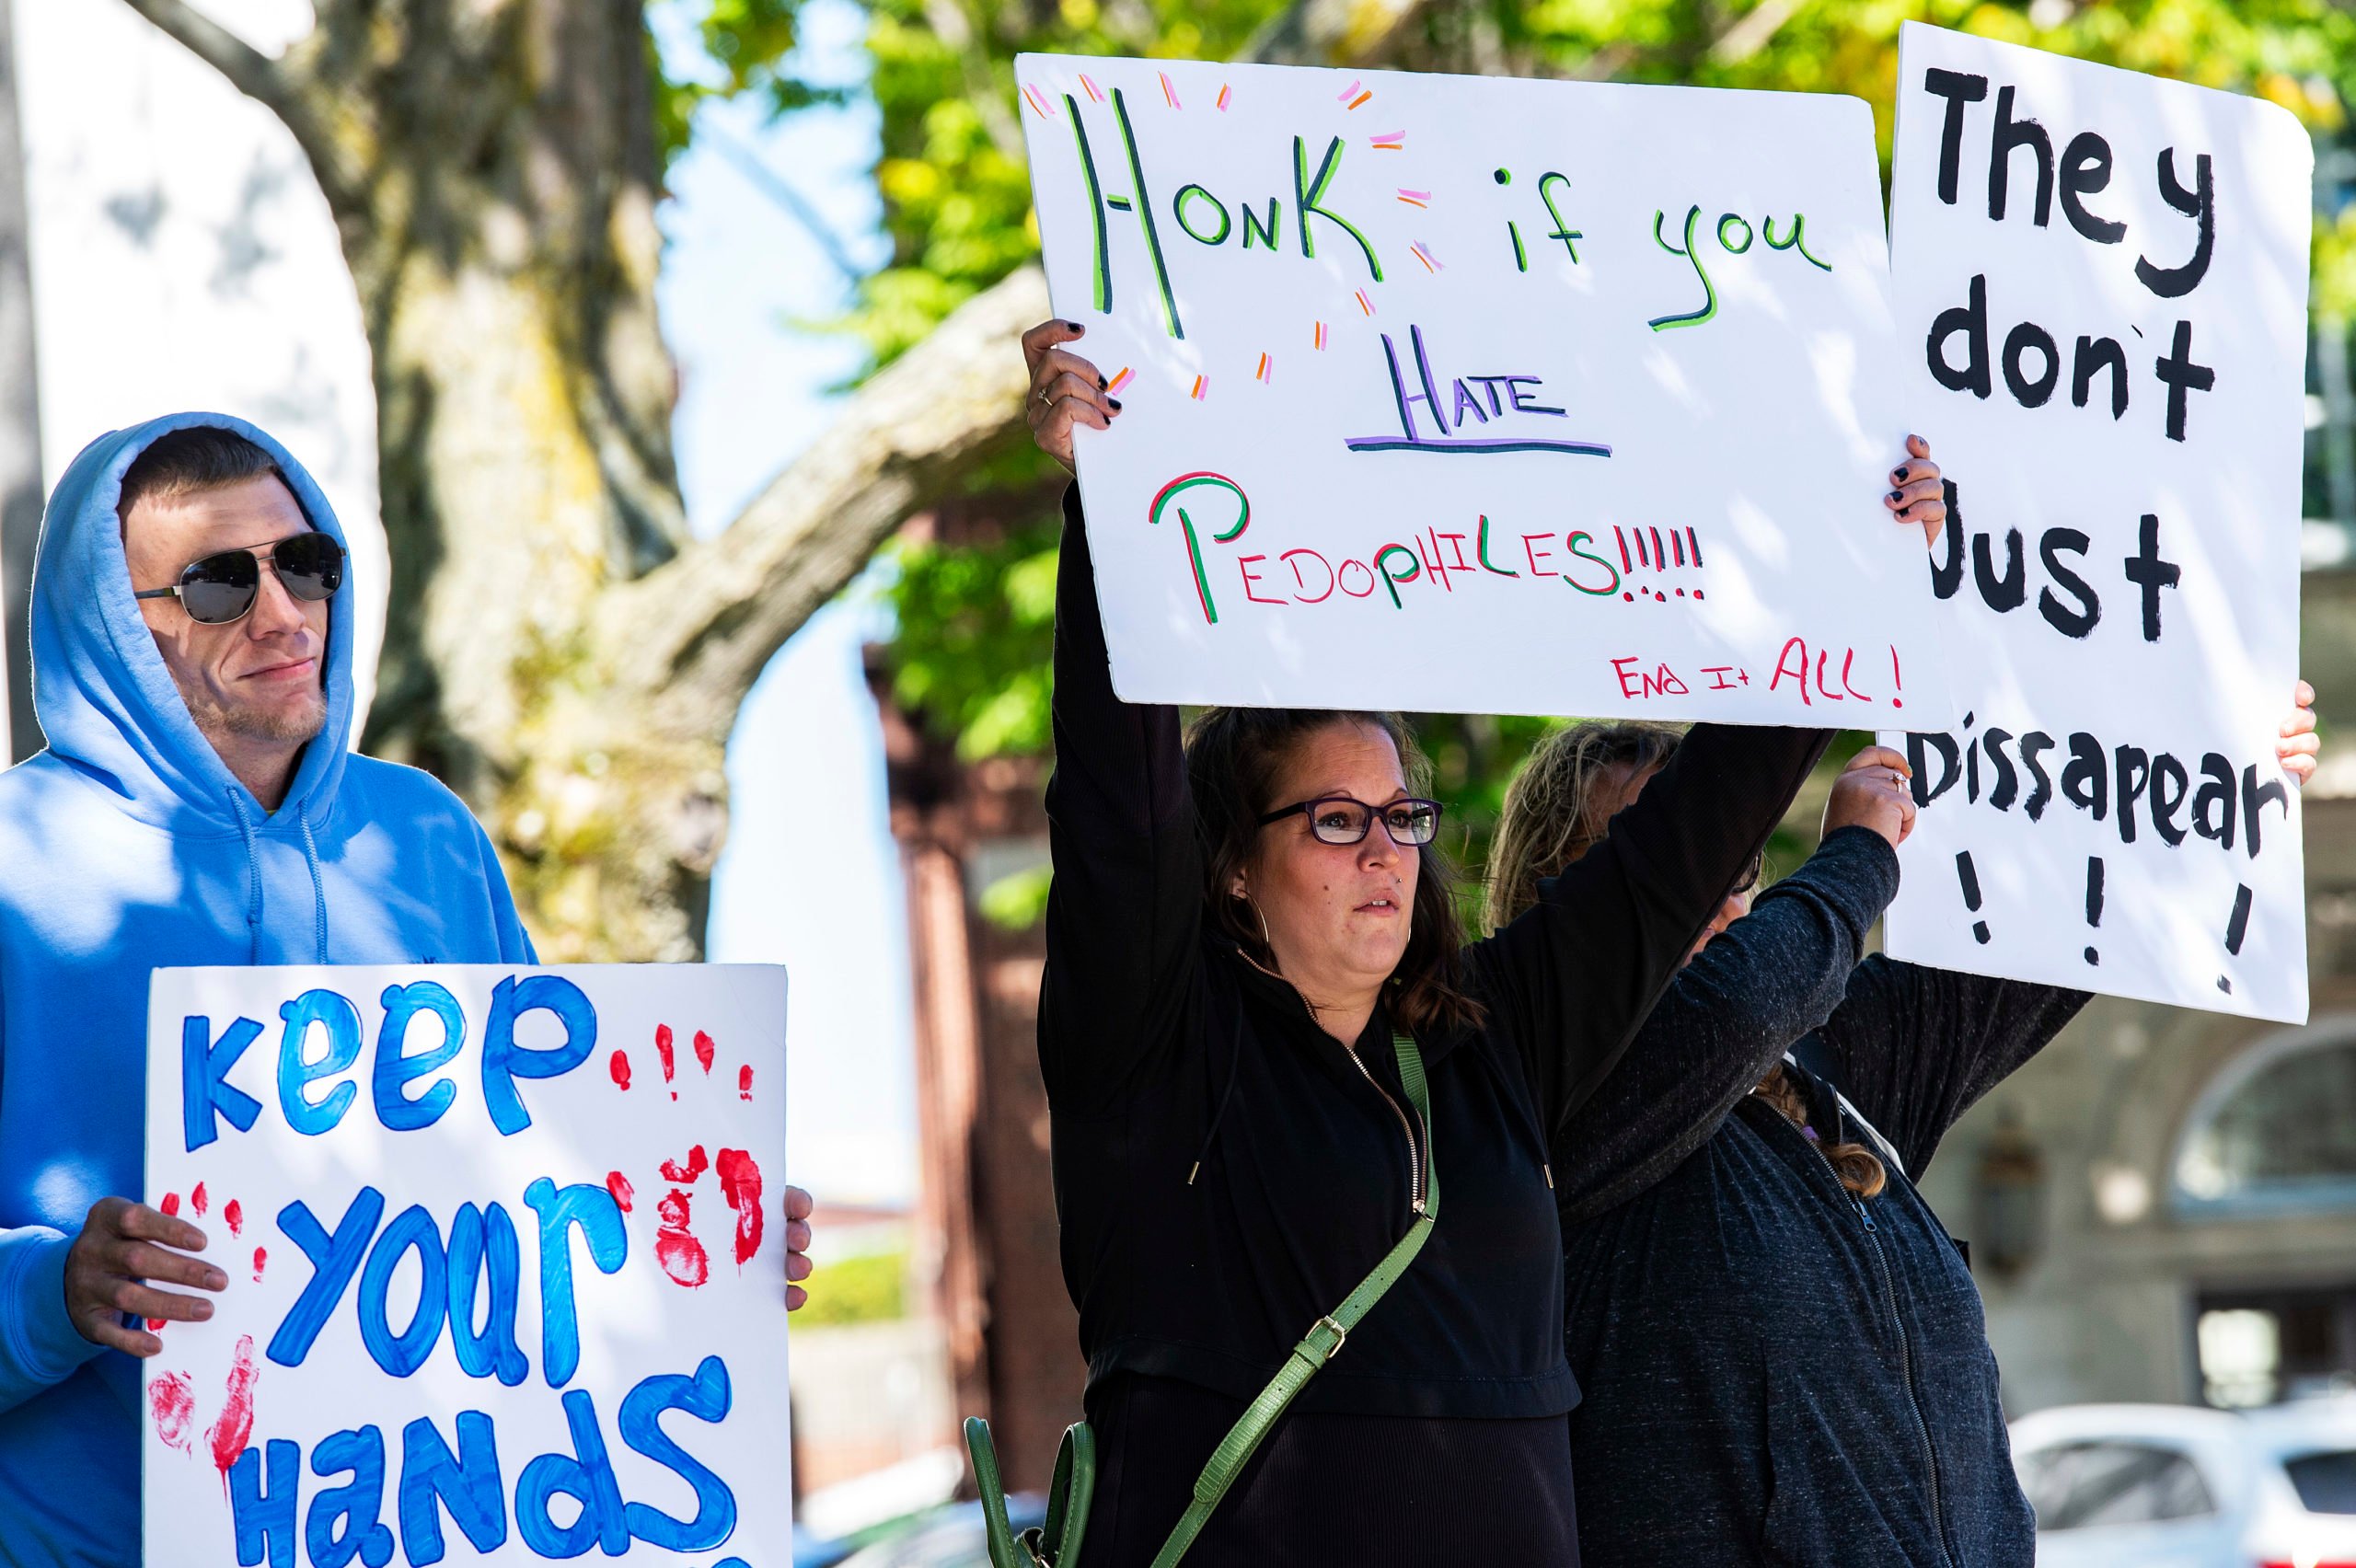 Demonstrators in Keene, New Hampshire, gather at a "Save the Children Rally" to protest child sex trafficking and pedophilia around the world, on September 19, 2020. - Anti-paedophilia protests are flaring in th US where the QAnon movement started. QAnon is the umbrella term for a sprawling set of internet conspiracy theories that allege that the world is run by a cabal of Satan-worshiping pedophiles who are plotting against US President Donald Trump while operating a global child sex-trafficking ring. (Photo by Joseph Prezioso / AFP) (Photo by JOSEPH PREZIOSO/AFP via Getty Images)